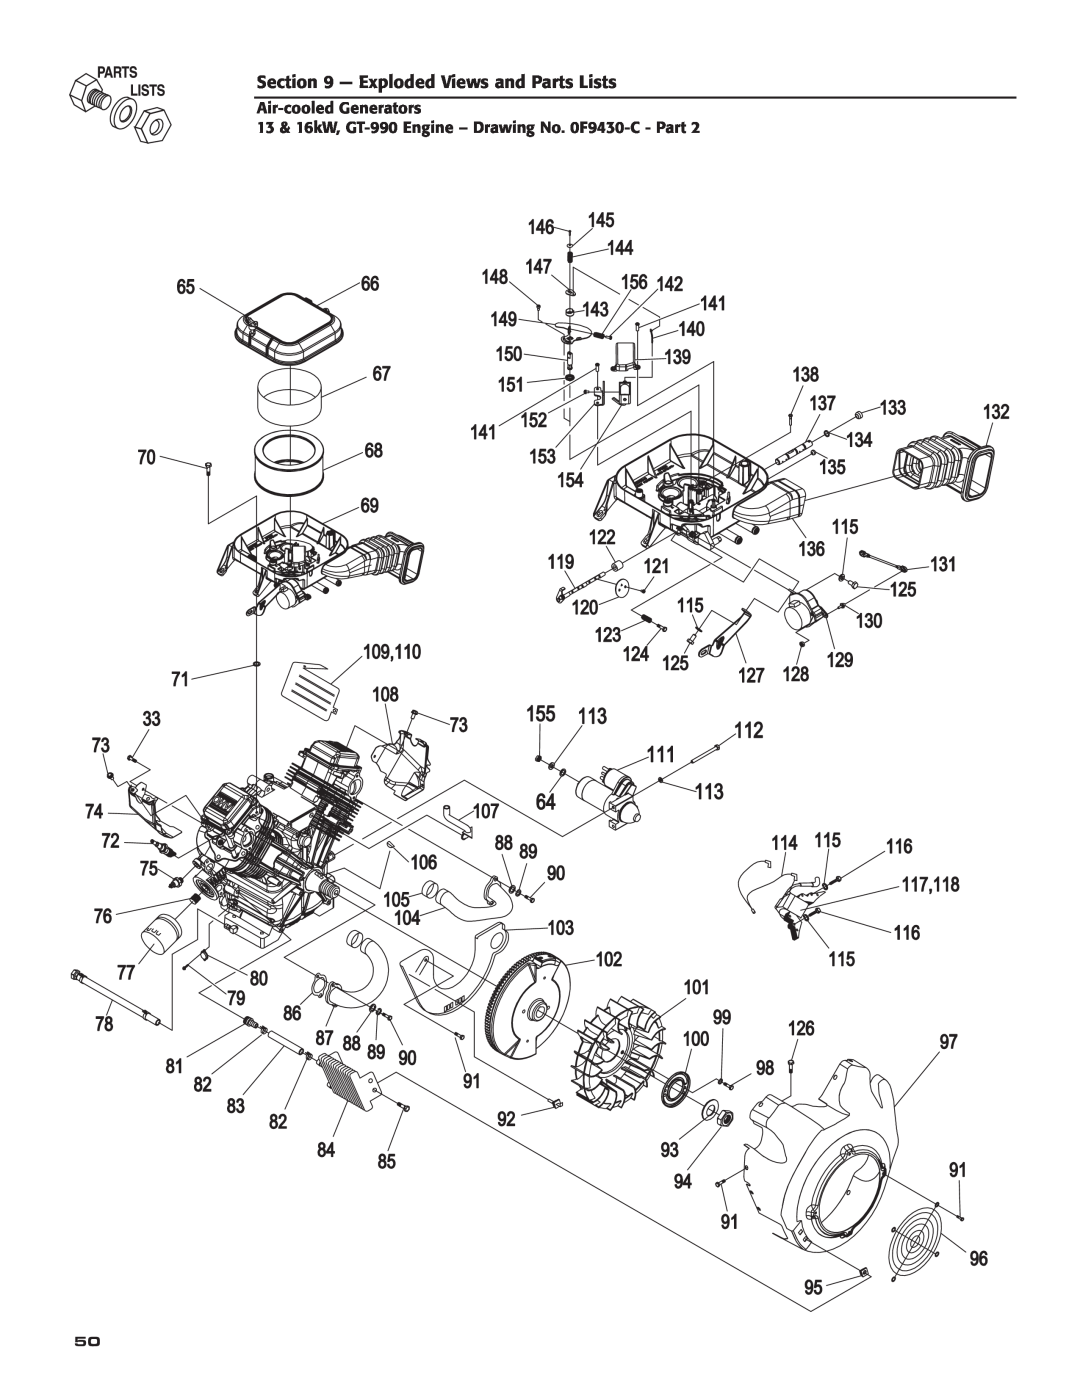 Guardian Technologies 005283, 005281, 005282, 005284, 005280, 005243 Exploded Views and Parts Lists, Air-cooledGenerators 